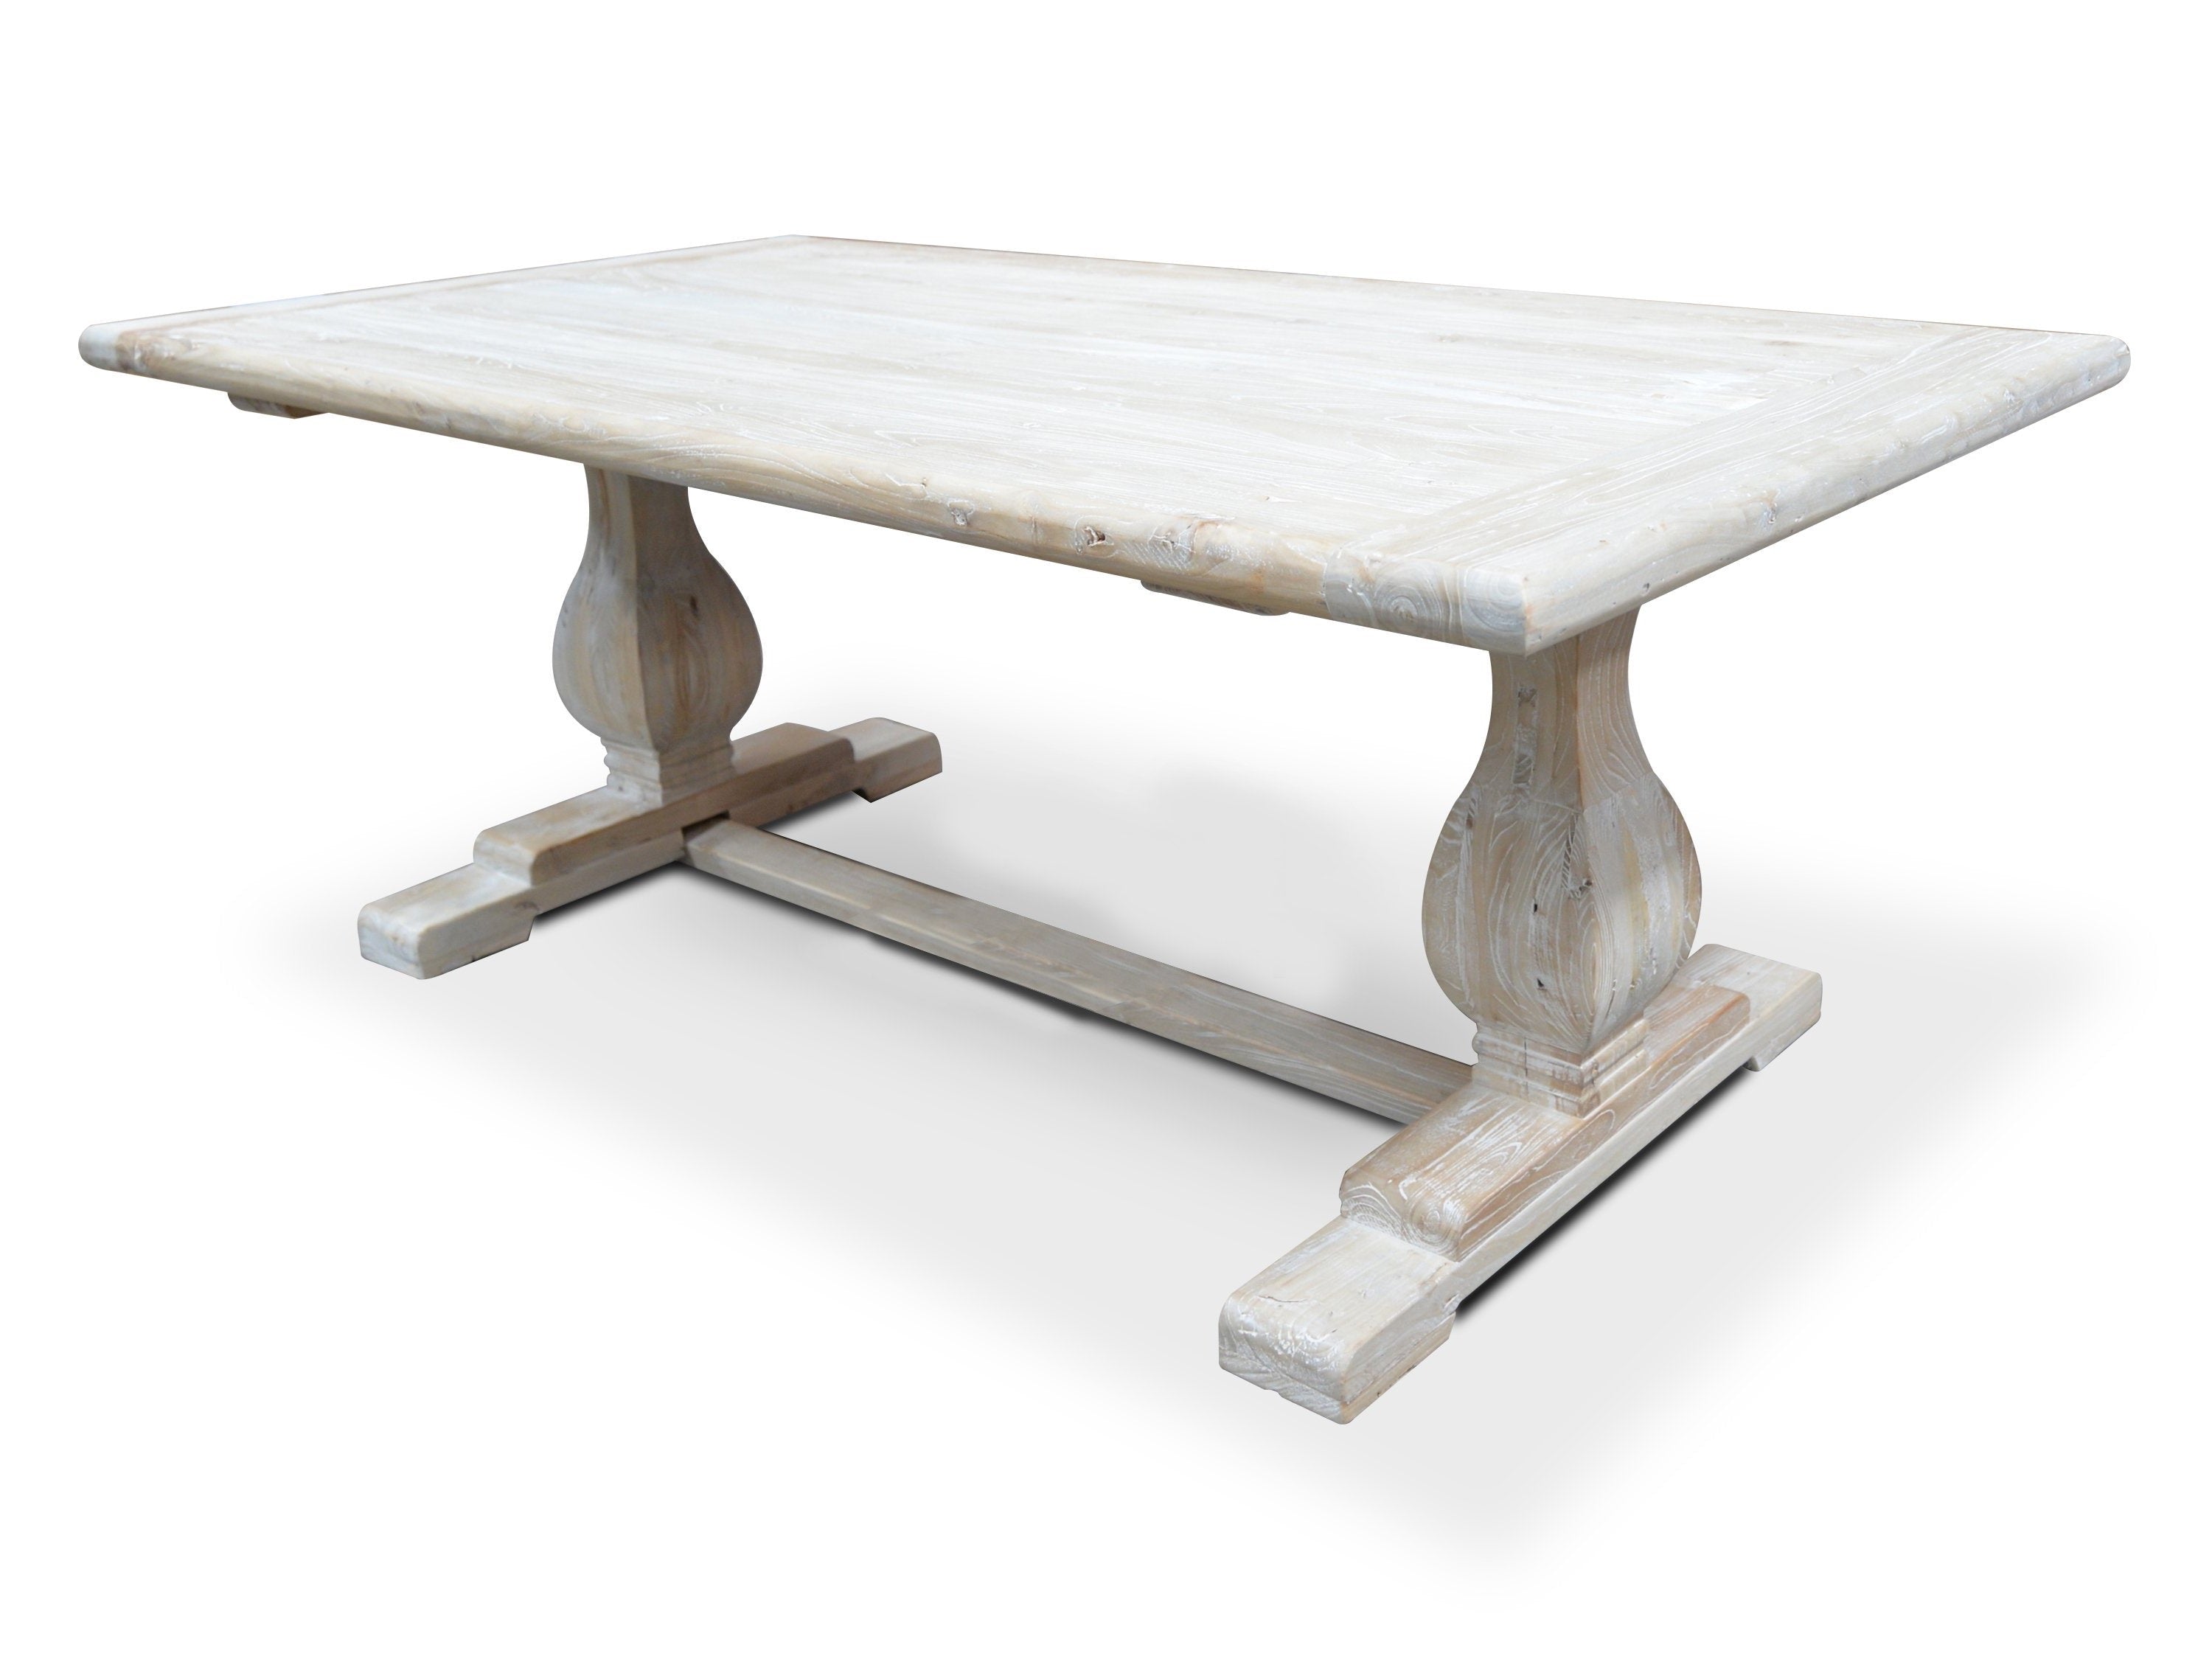 Mark Reclaimed 1.98m Ash Wood Dining Table - Rustic White Washed - Dining Tables